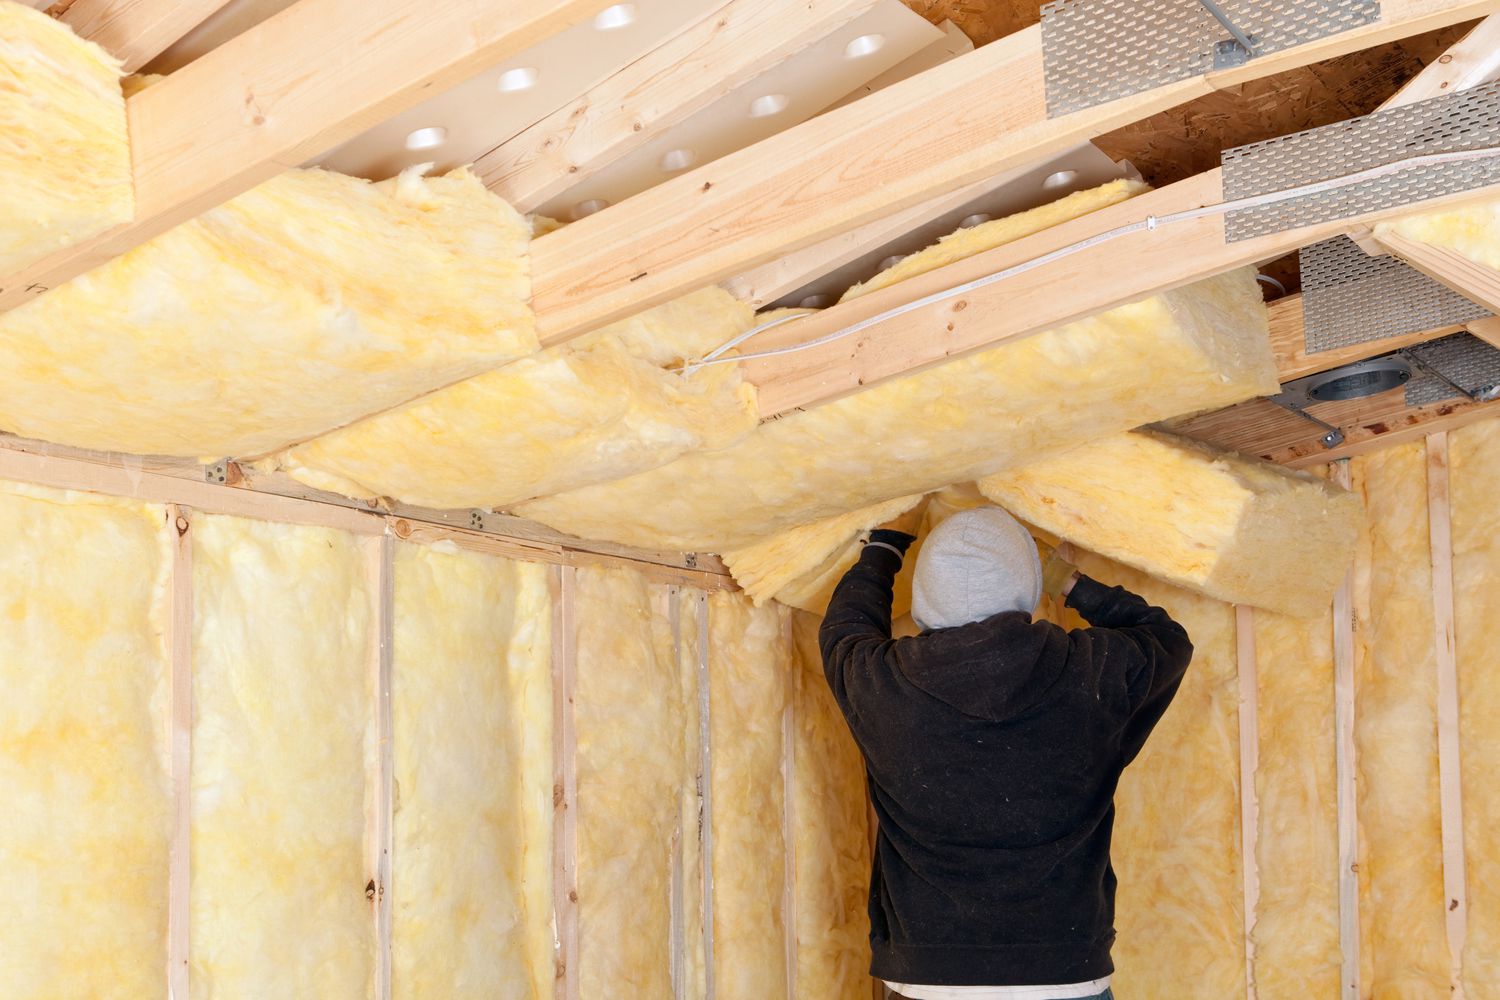 Install the Insulations